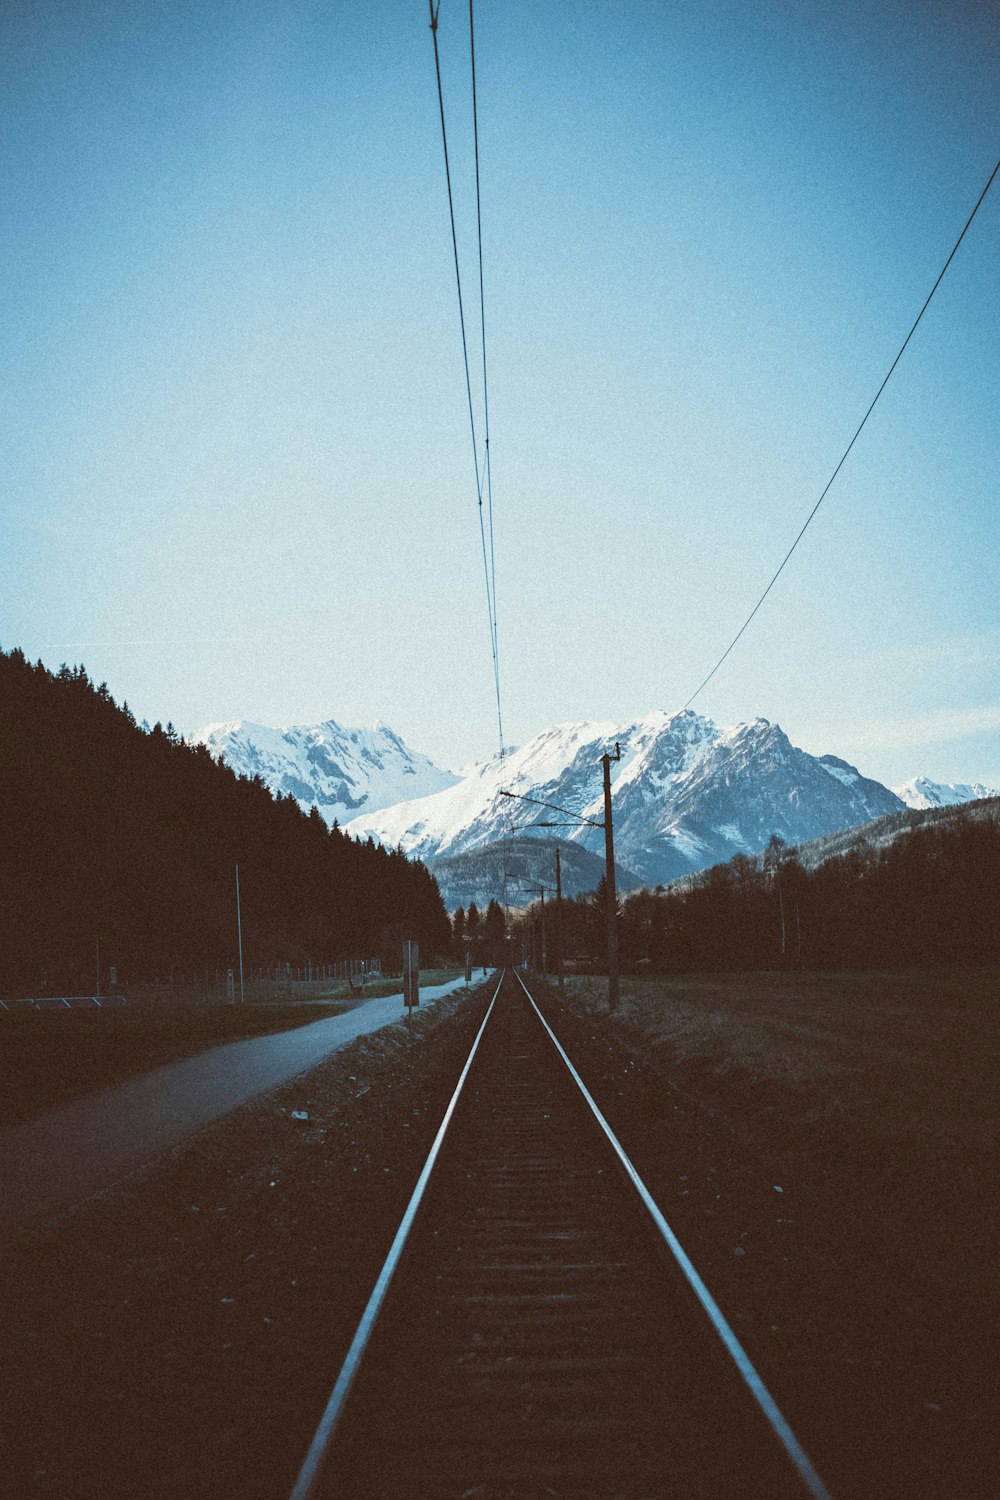 train tracks near road with snow capped mountains background